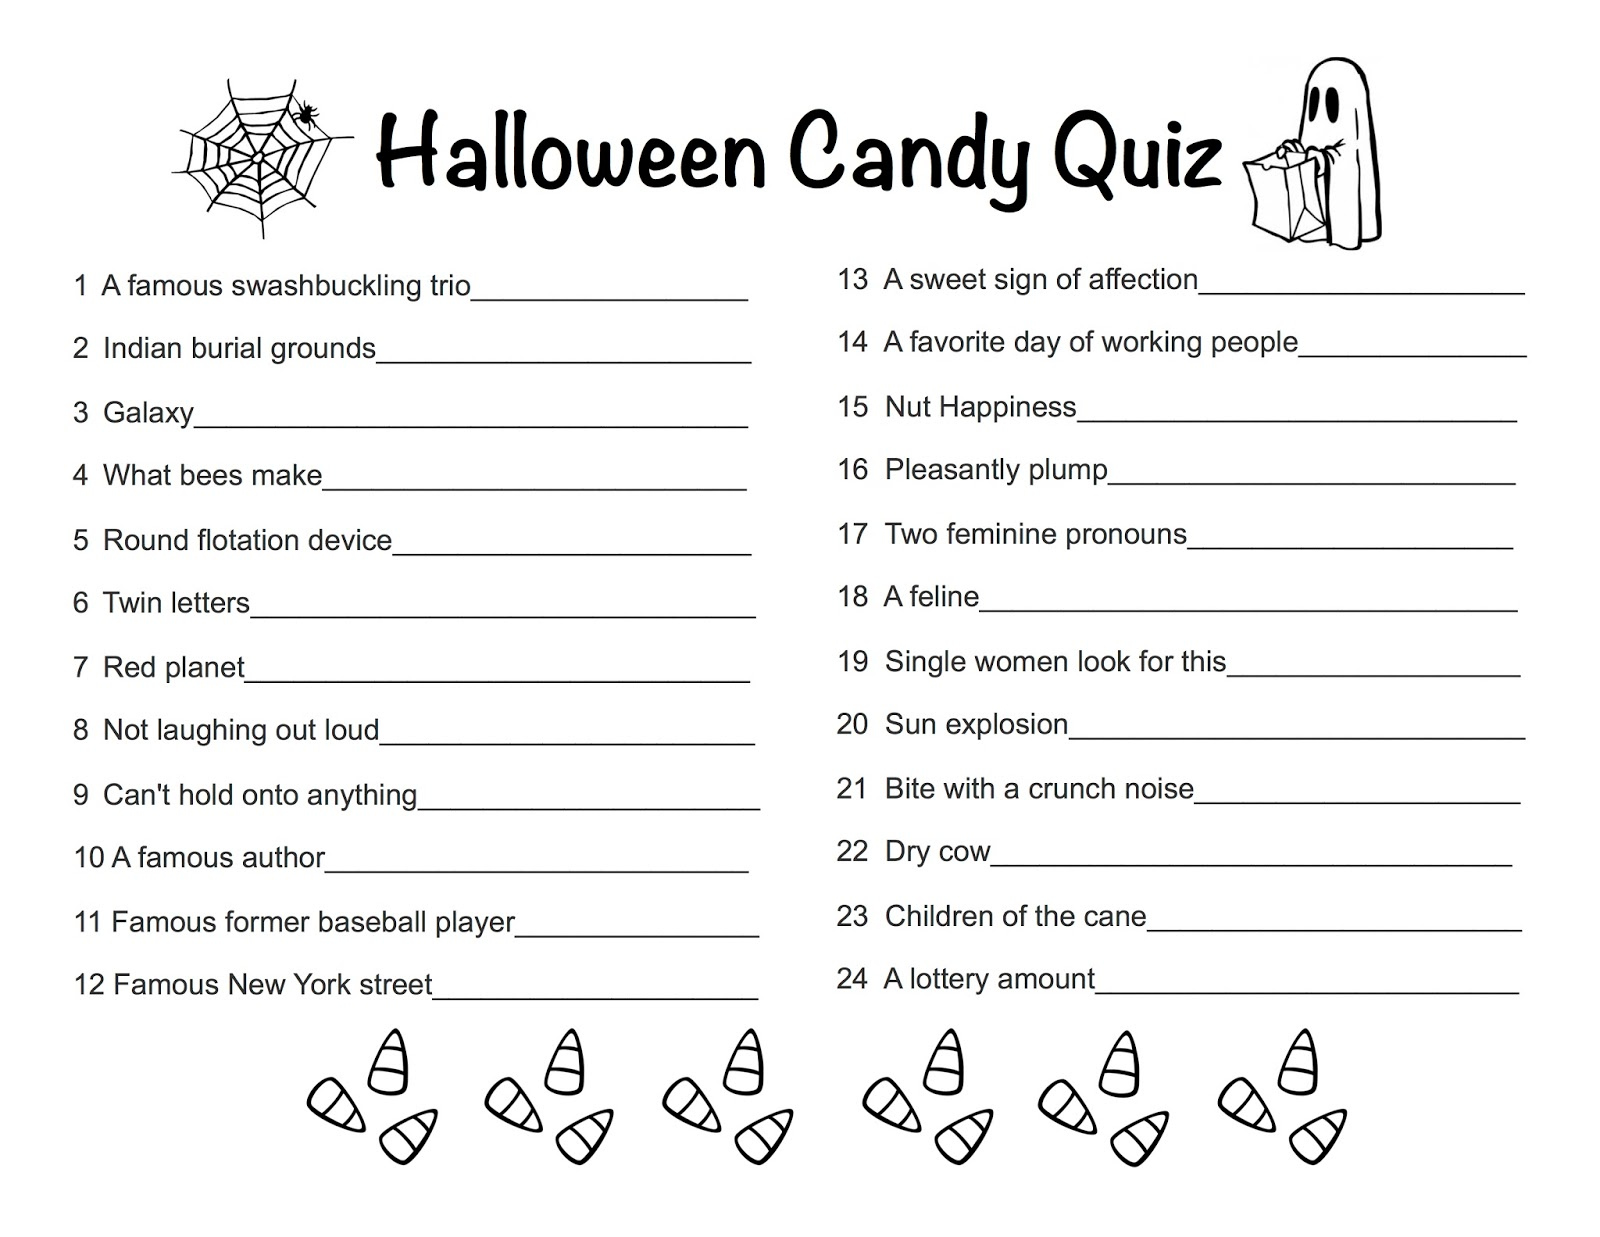 Halloween Candy Trivia Questions And Answers